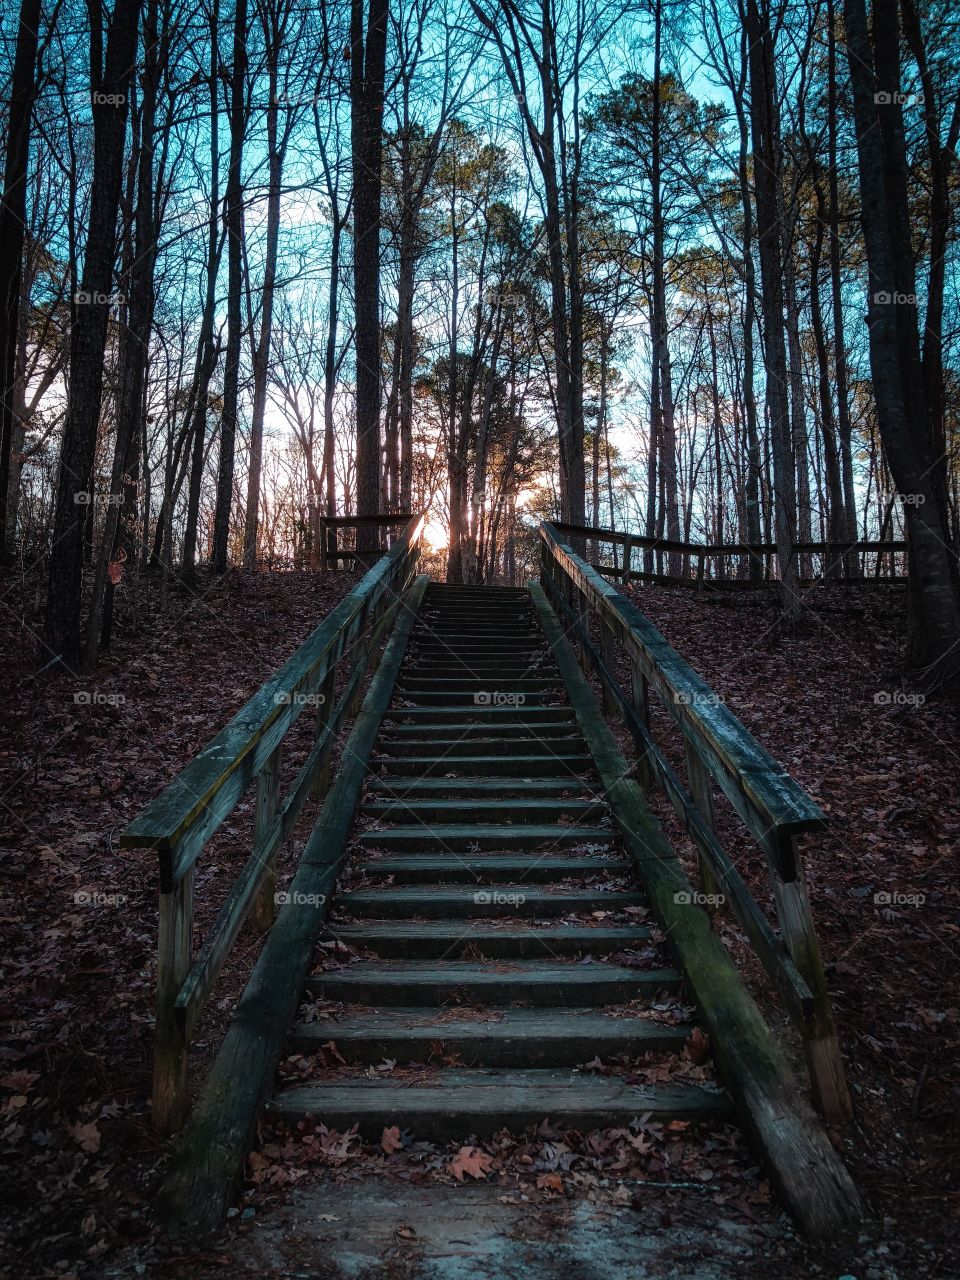 Stairway to the sunrise